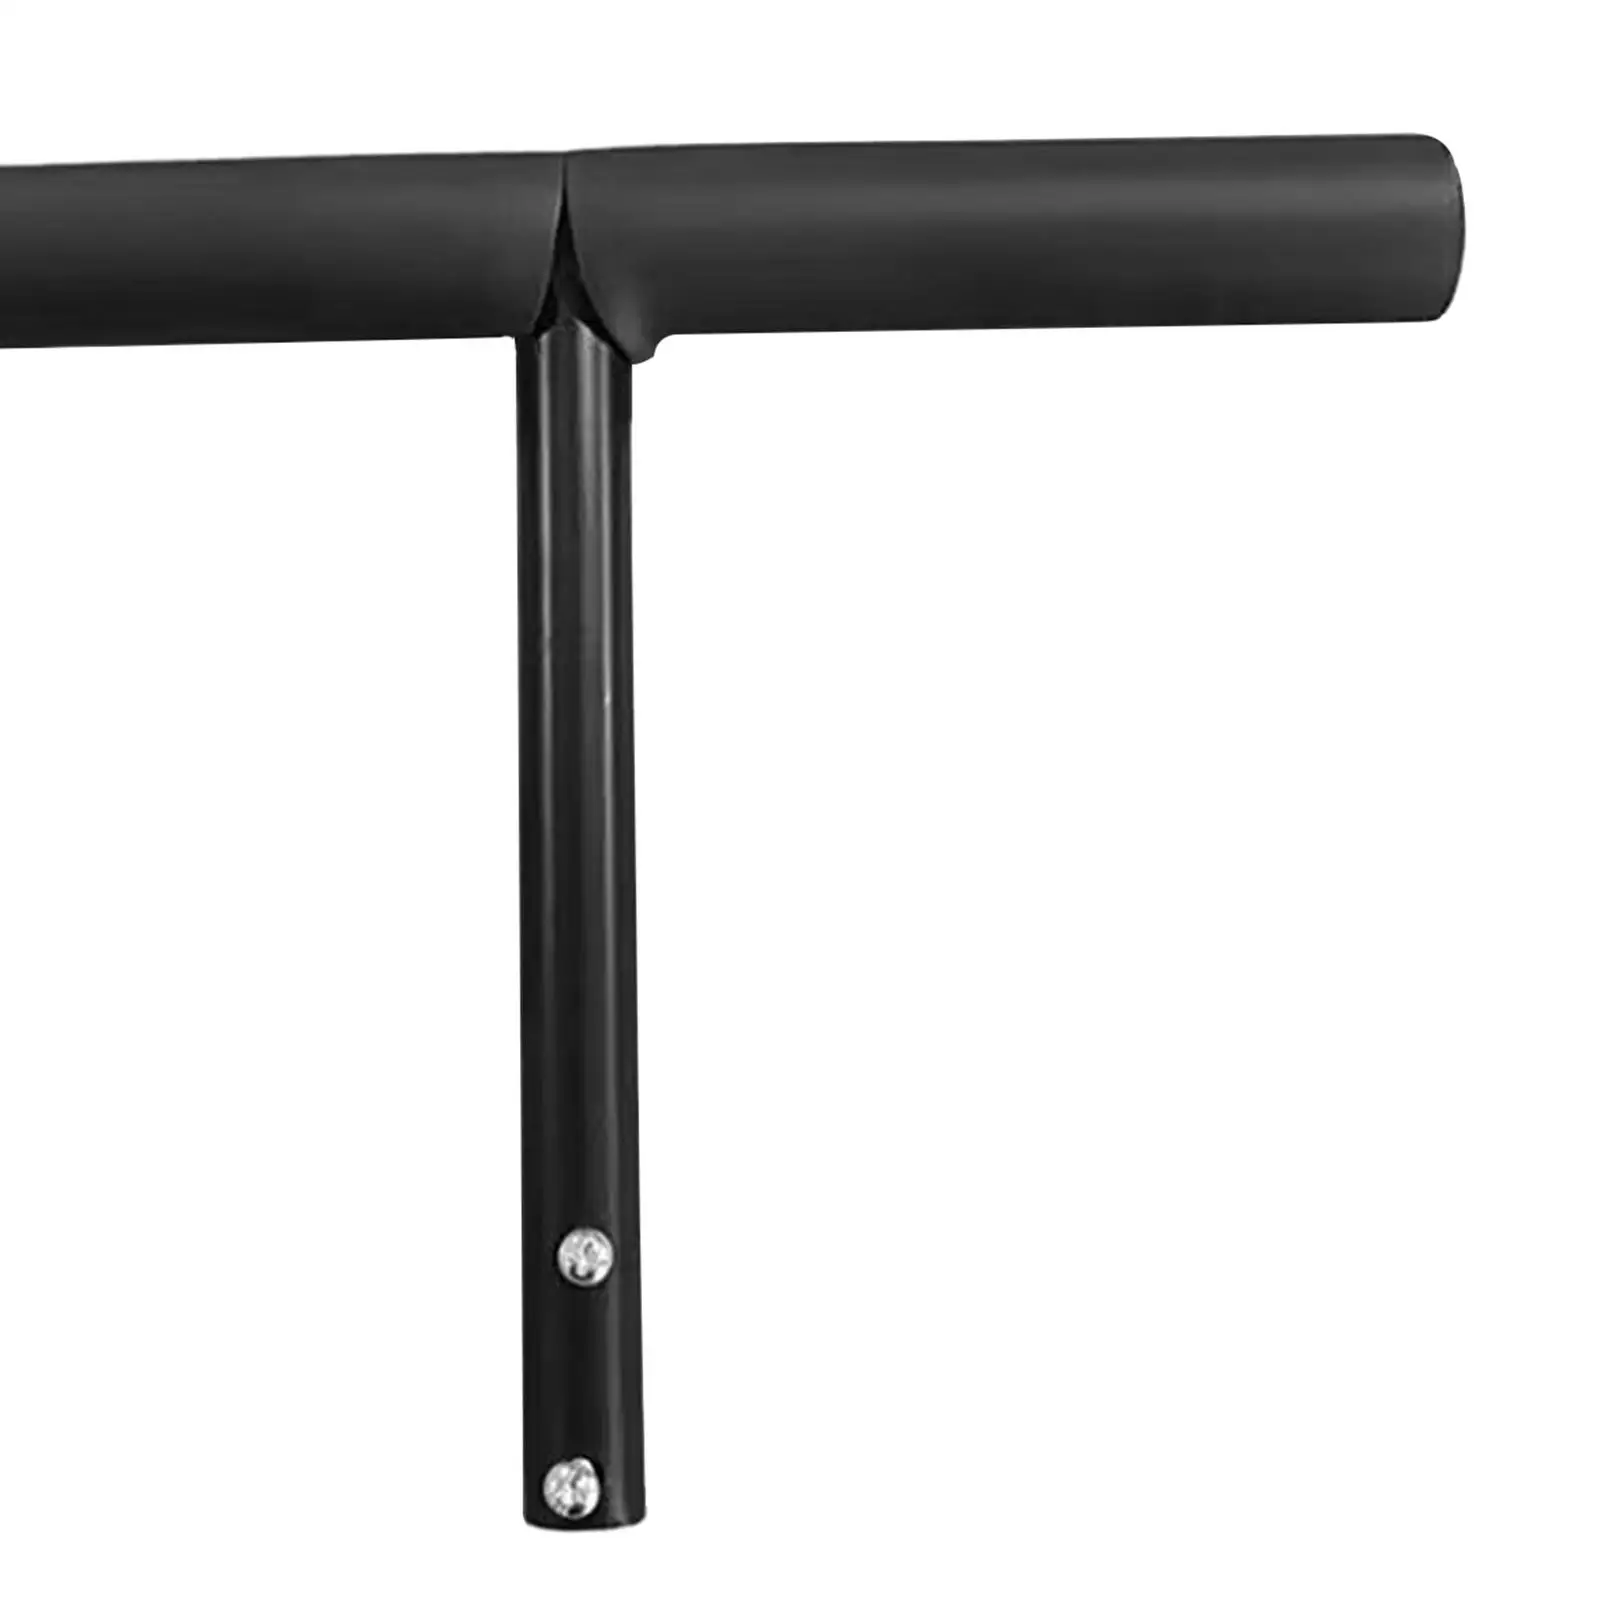 T Shaped Push Handle Bar Easy to Install Sturdy Practical Replacement Baby Bike Accessory Durable for Home Travel Outdoor